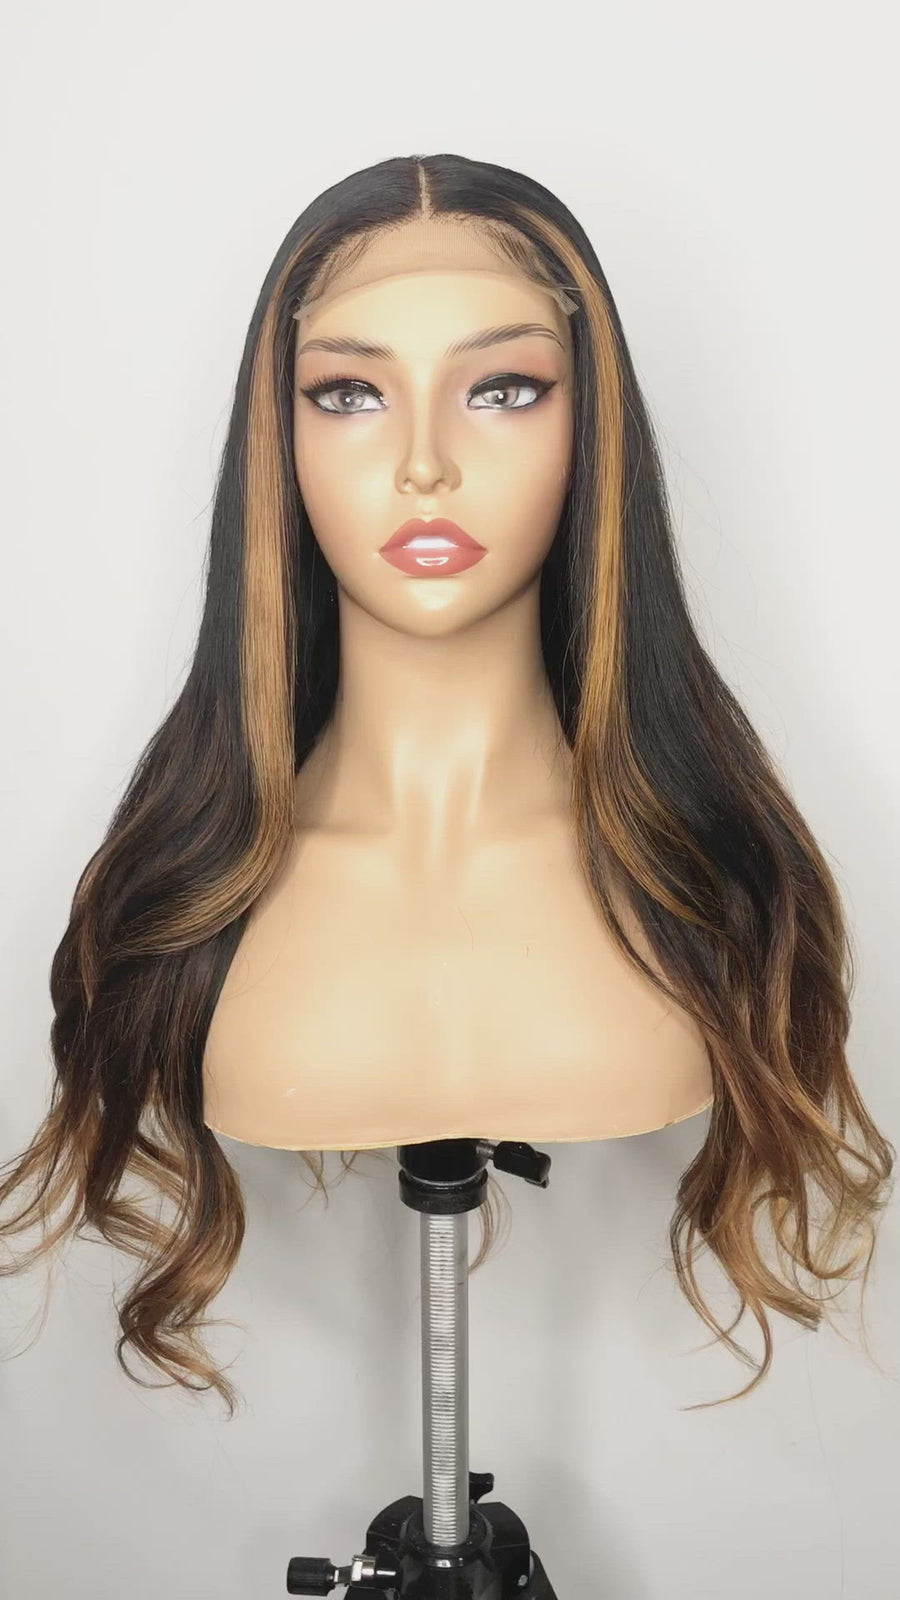 4*4 Lace closure wig with Golden Brown to Blonde Highlights